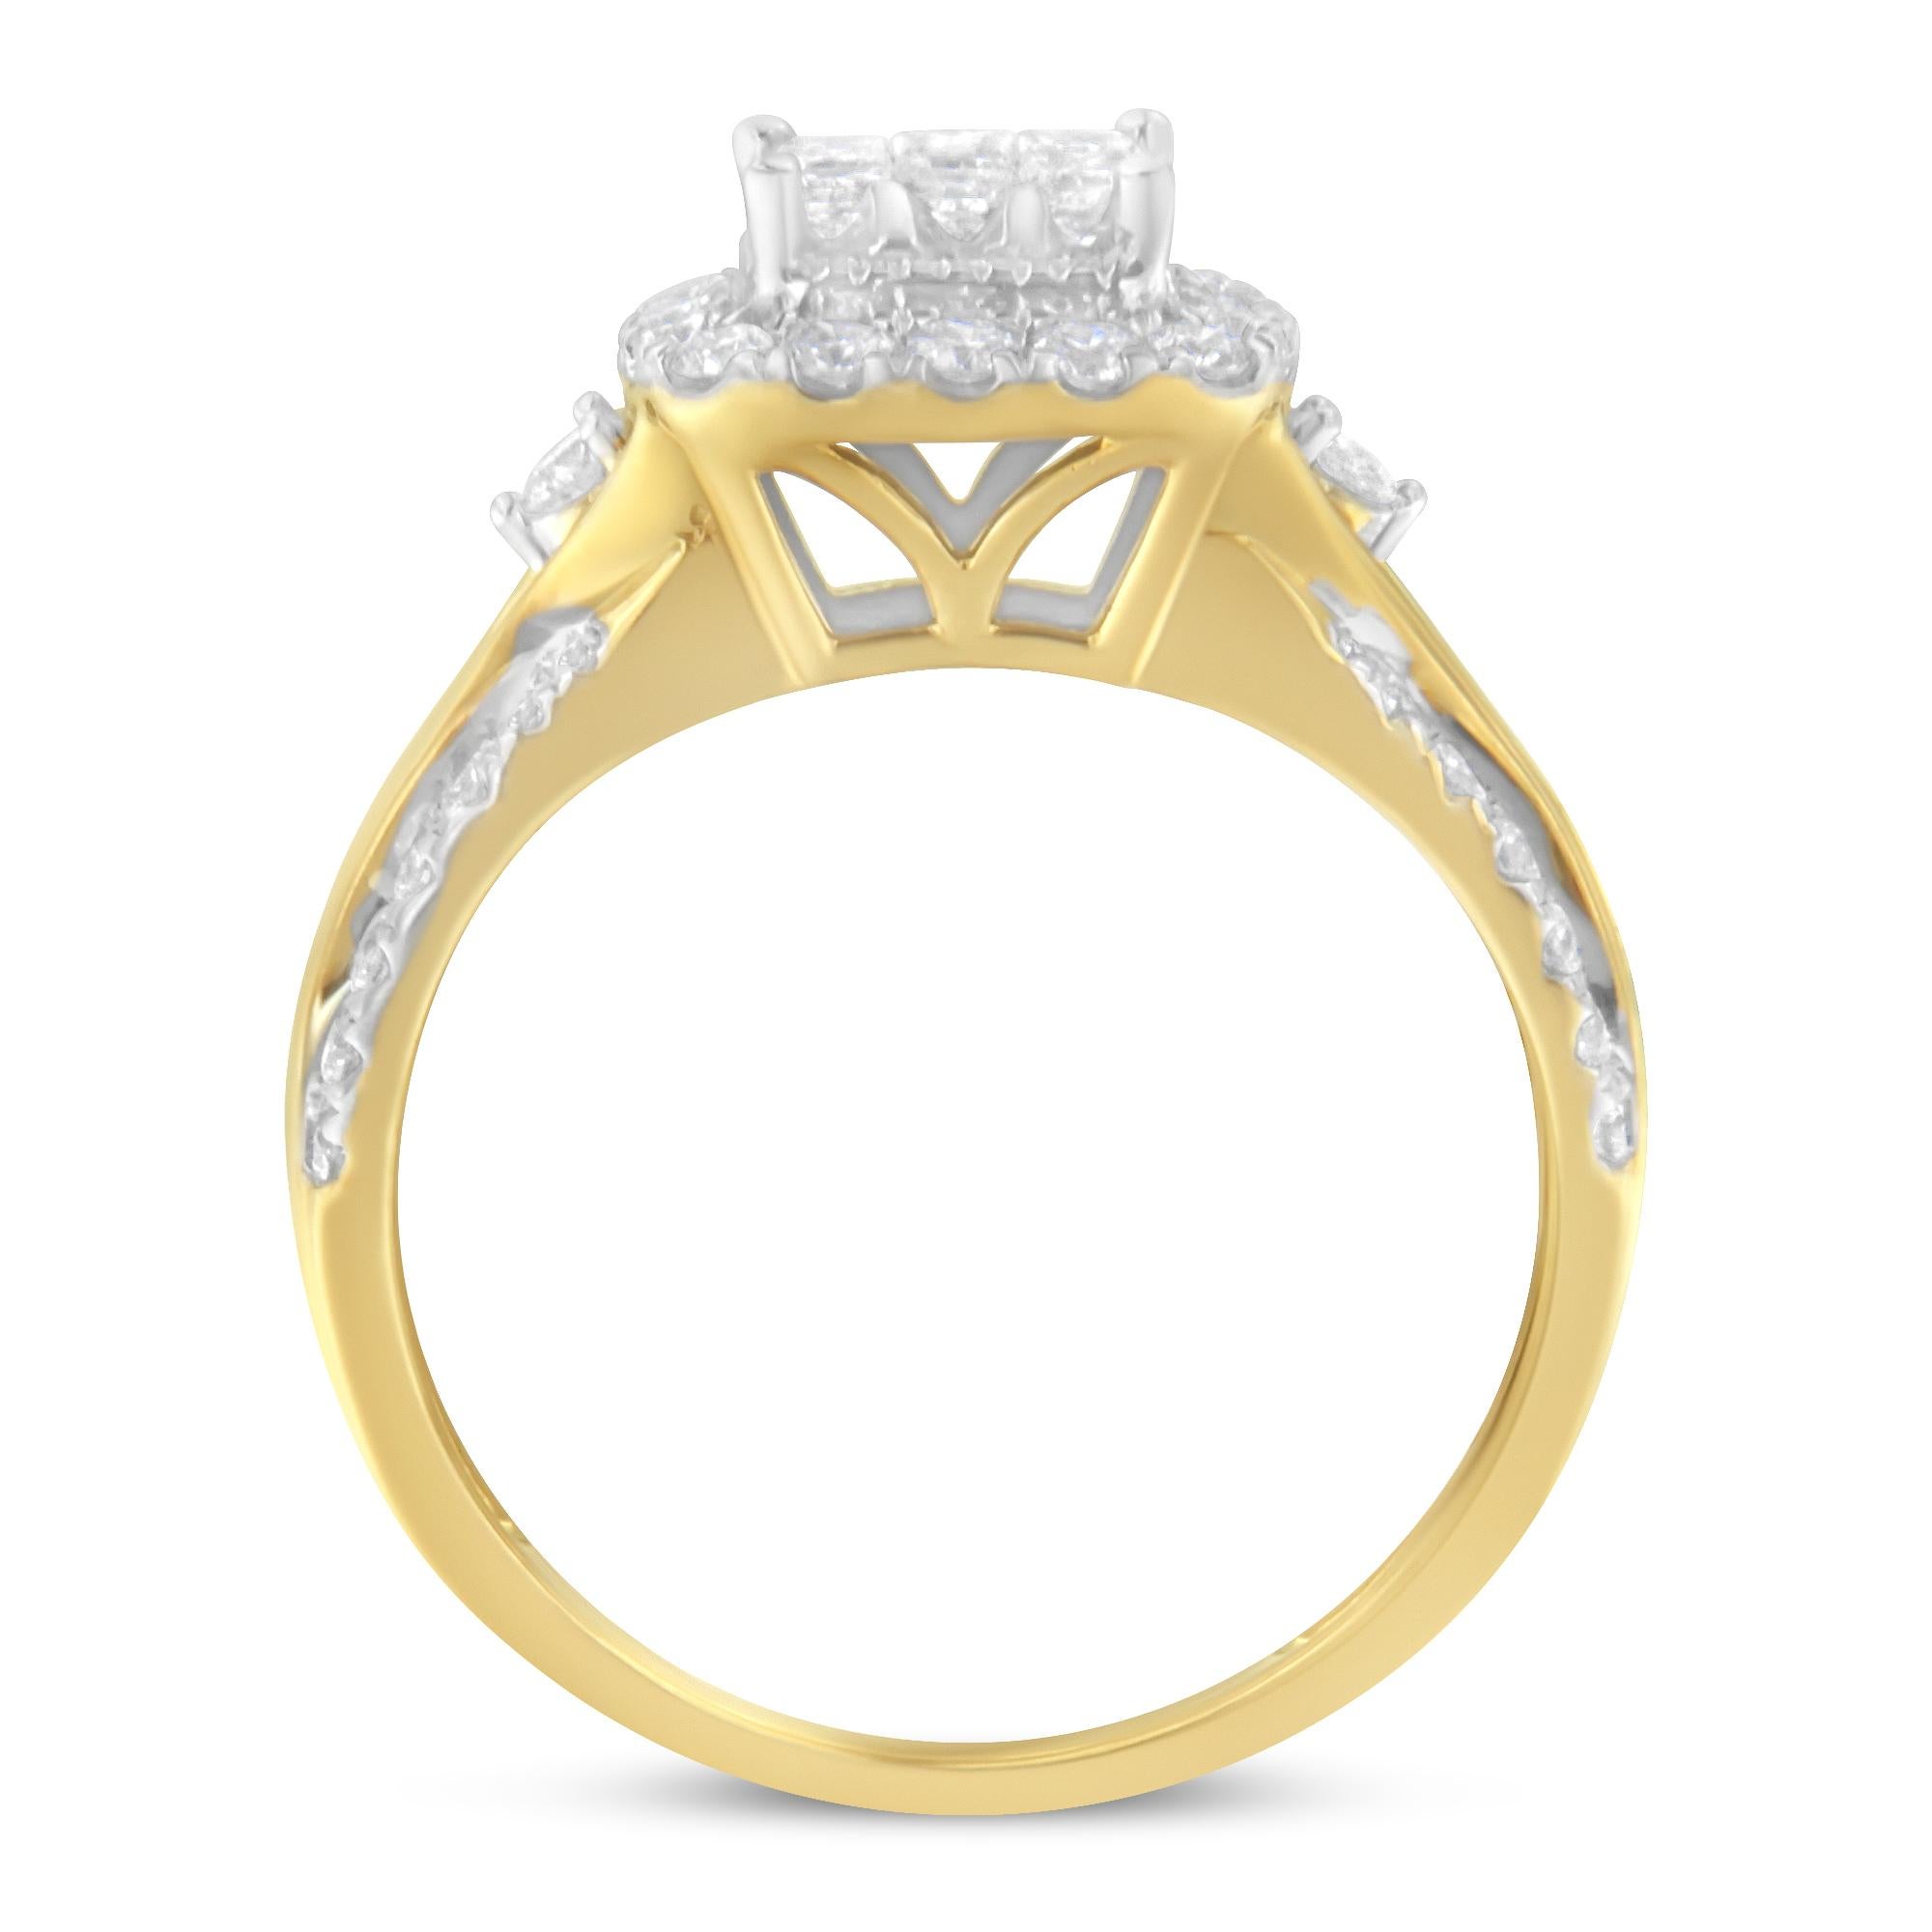 For Sale:  10K Yellow Gold 1.0 Carat Diamond Cluster Halo Triple-Band-Look Engagement Ring  4